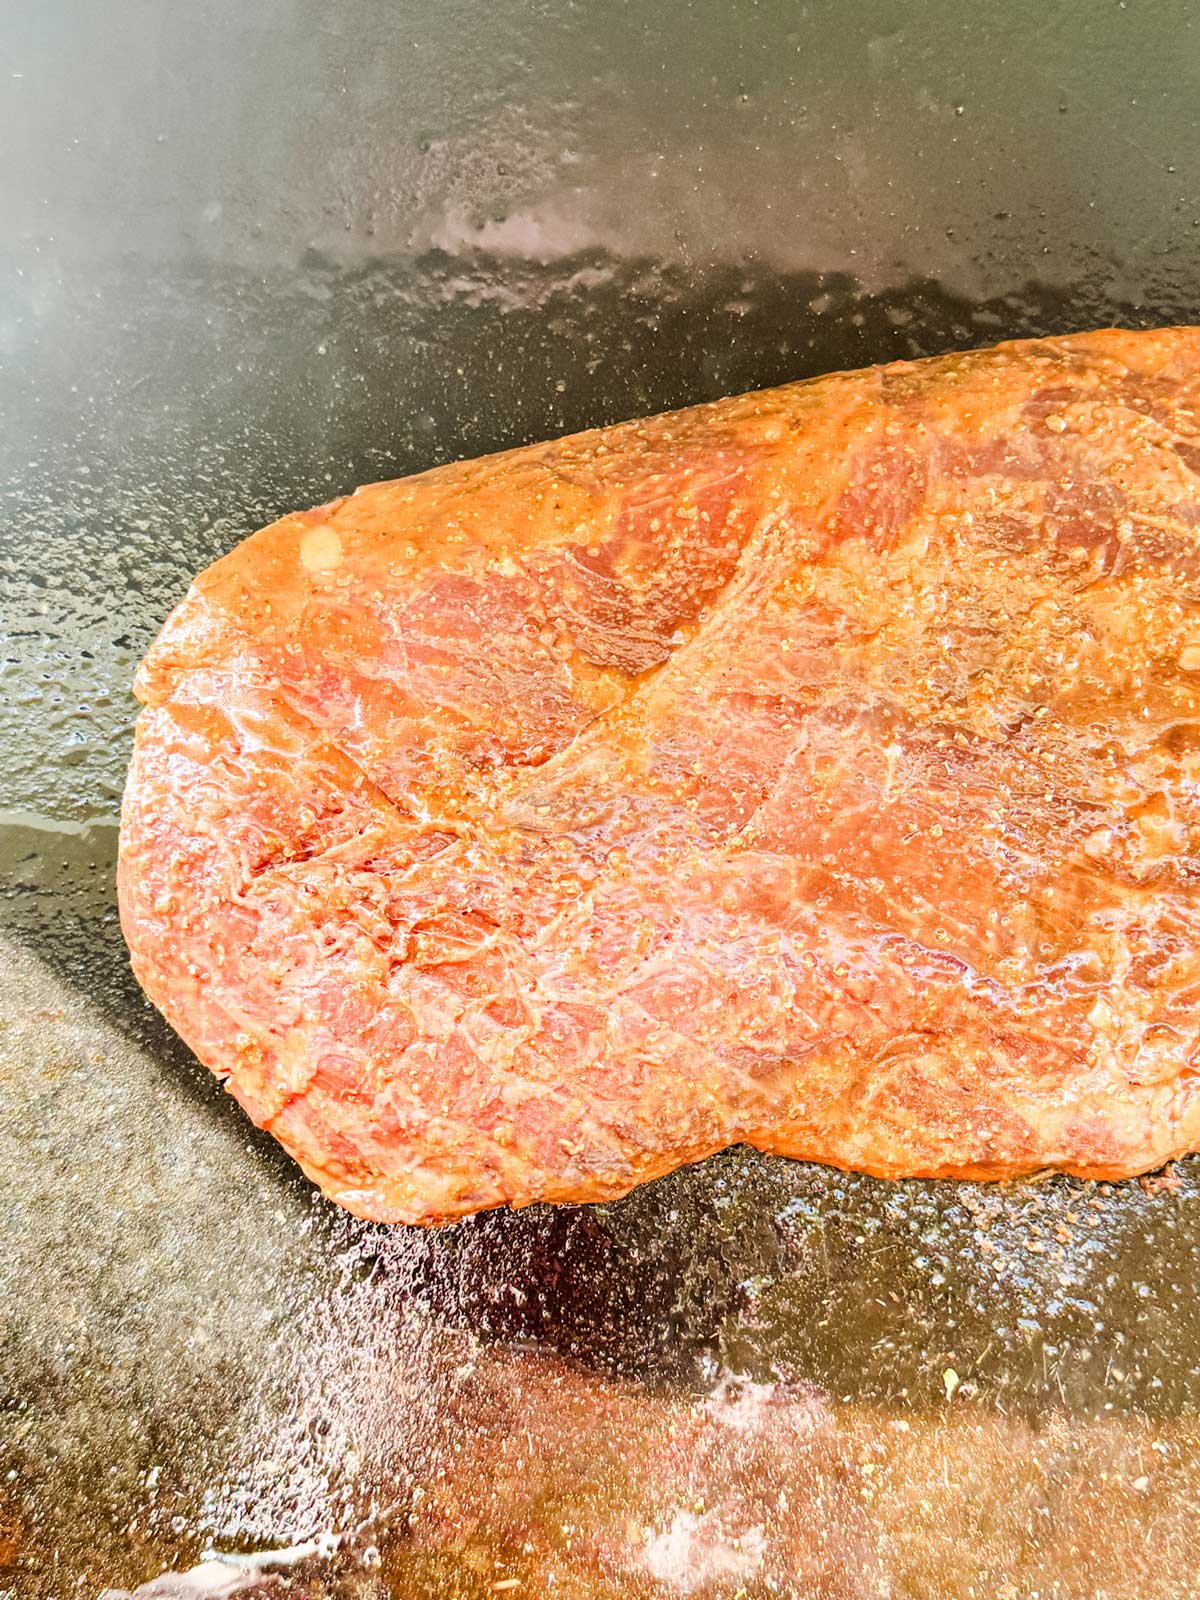 Flank steak cooking on a hot griddle.